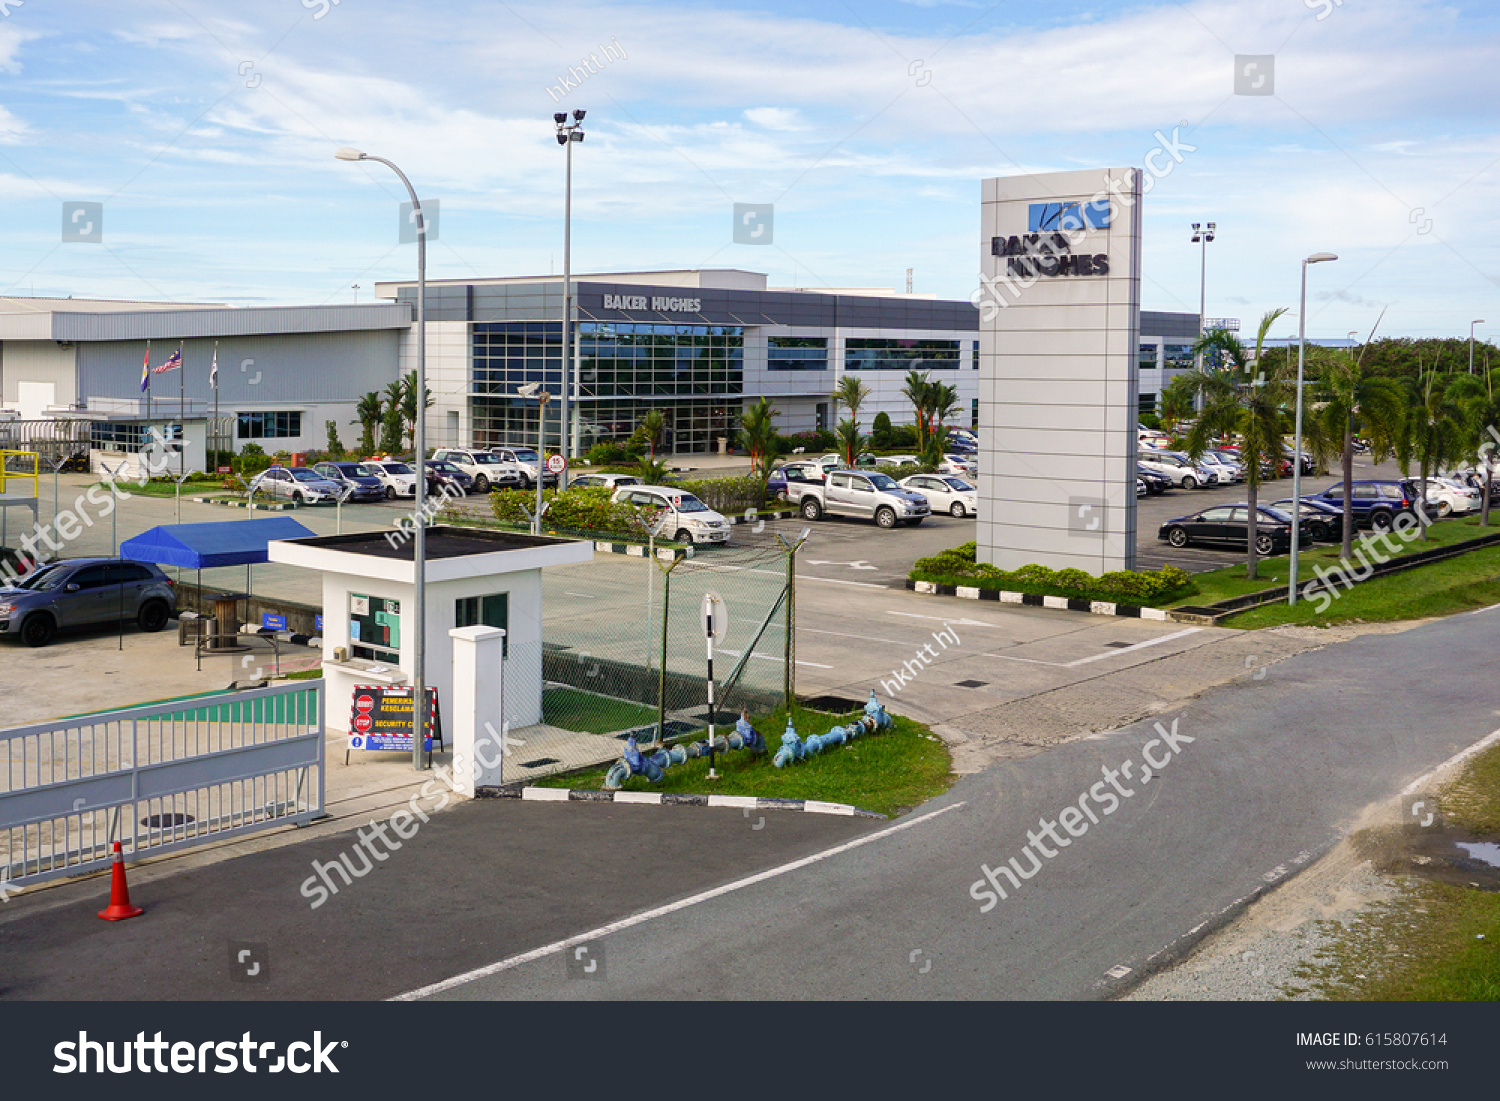 Labuanmalaysiaapr 52017baker Hughes Oil Gas Company Stock Photo Edit Now 615807614